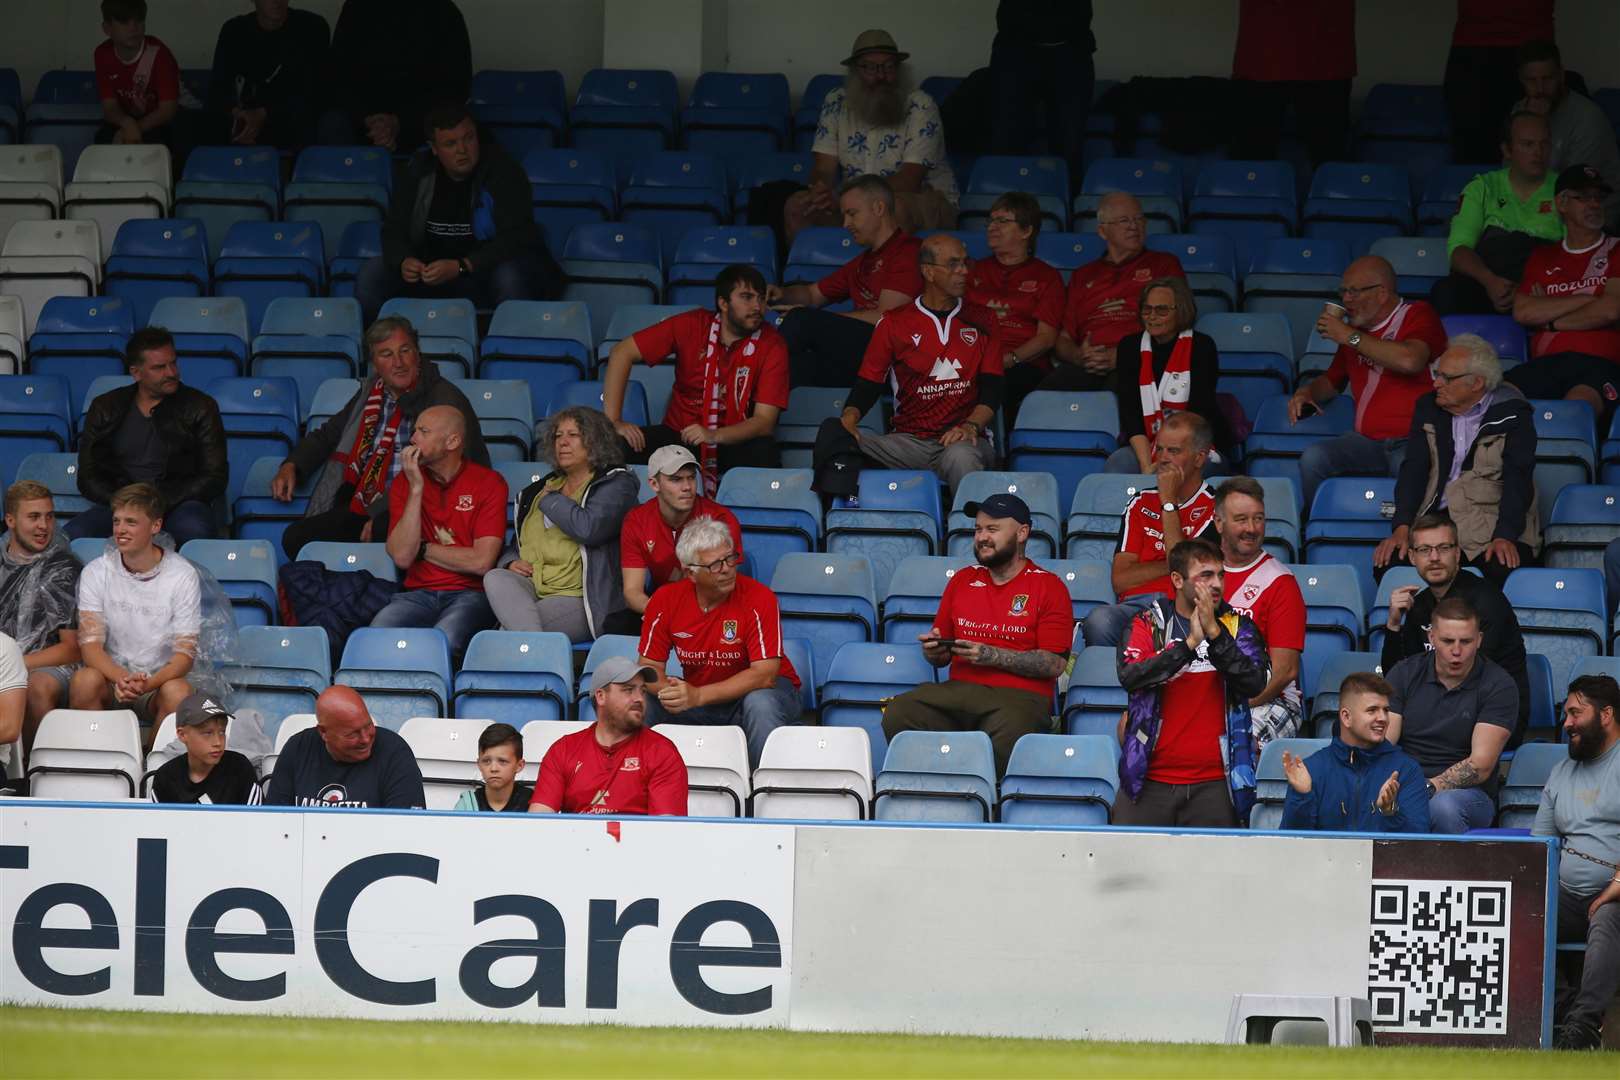 The visiting Morecambe fans at Priestfield. Picture: Andy Jones (50452222)